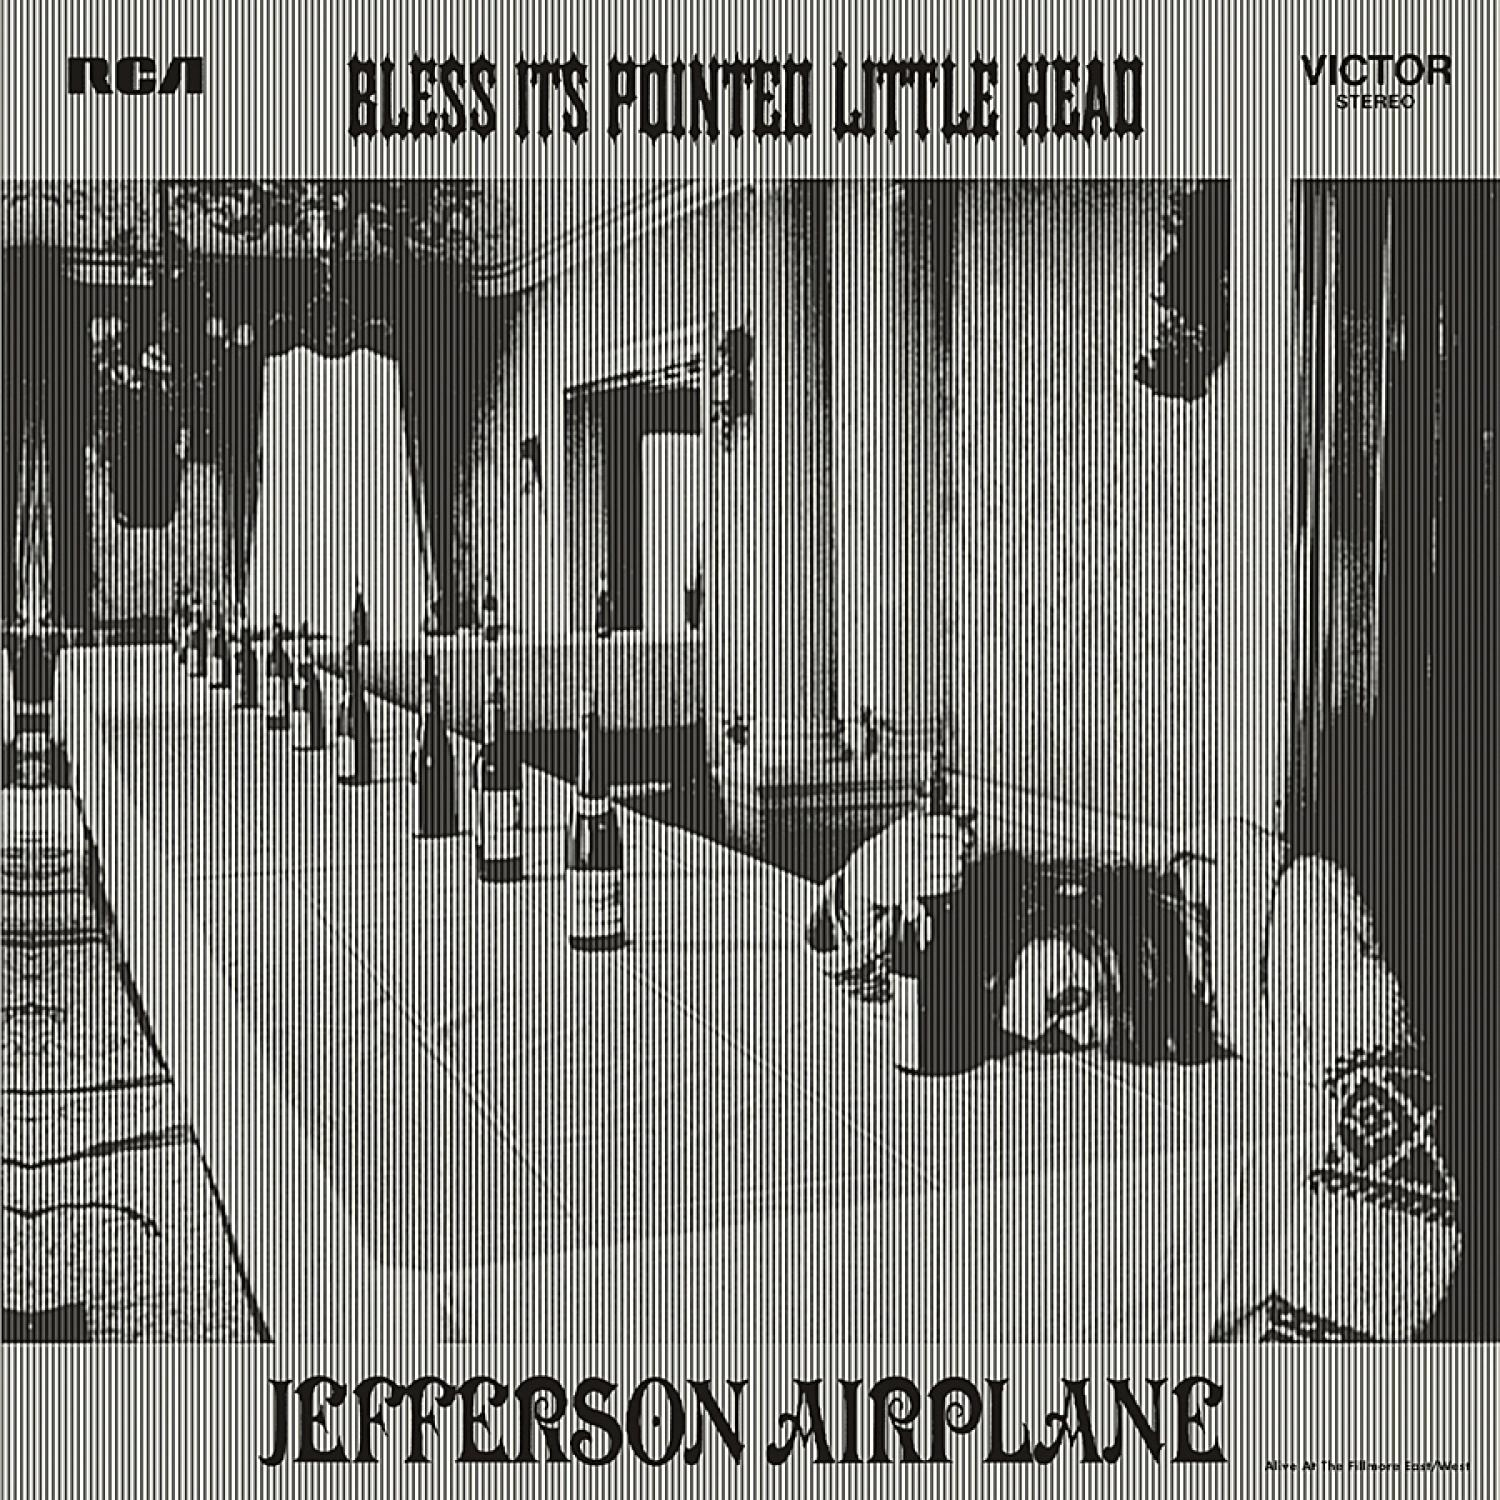 Jefferson Airplane - Pointed Its Little - (CD) Bless Head